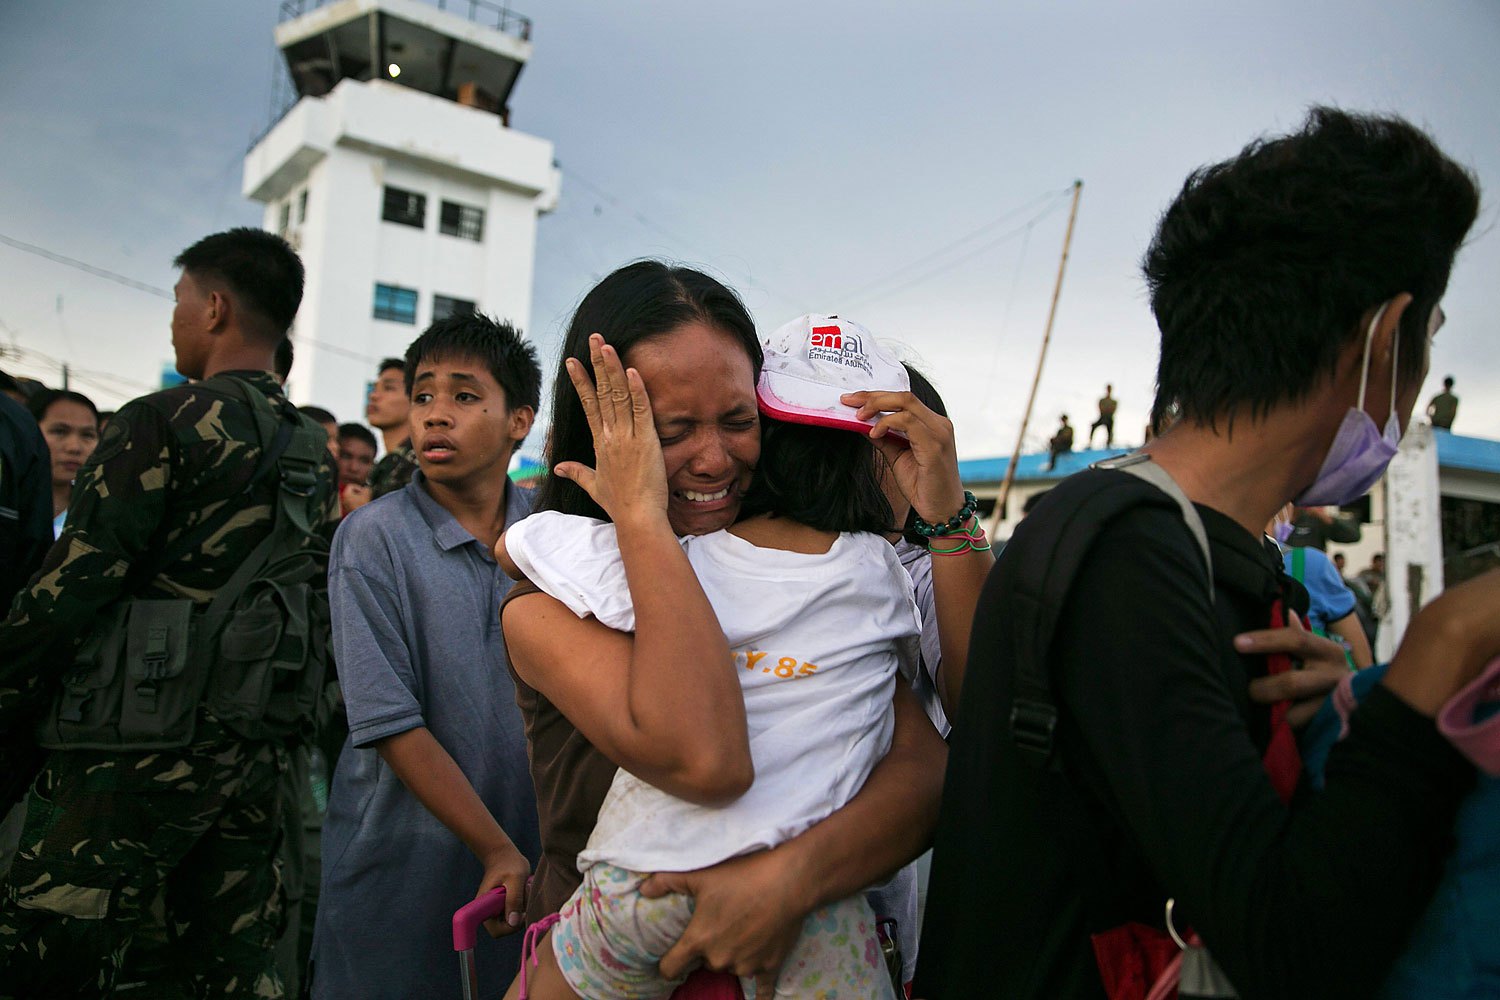 A woman carrying a child cries as they and other survivors of Supertyphoon Haiyan wait to board an aircraft during an evacuation in the Philippine town of Tacloban on Nov. 12, 2013